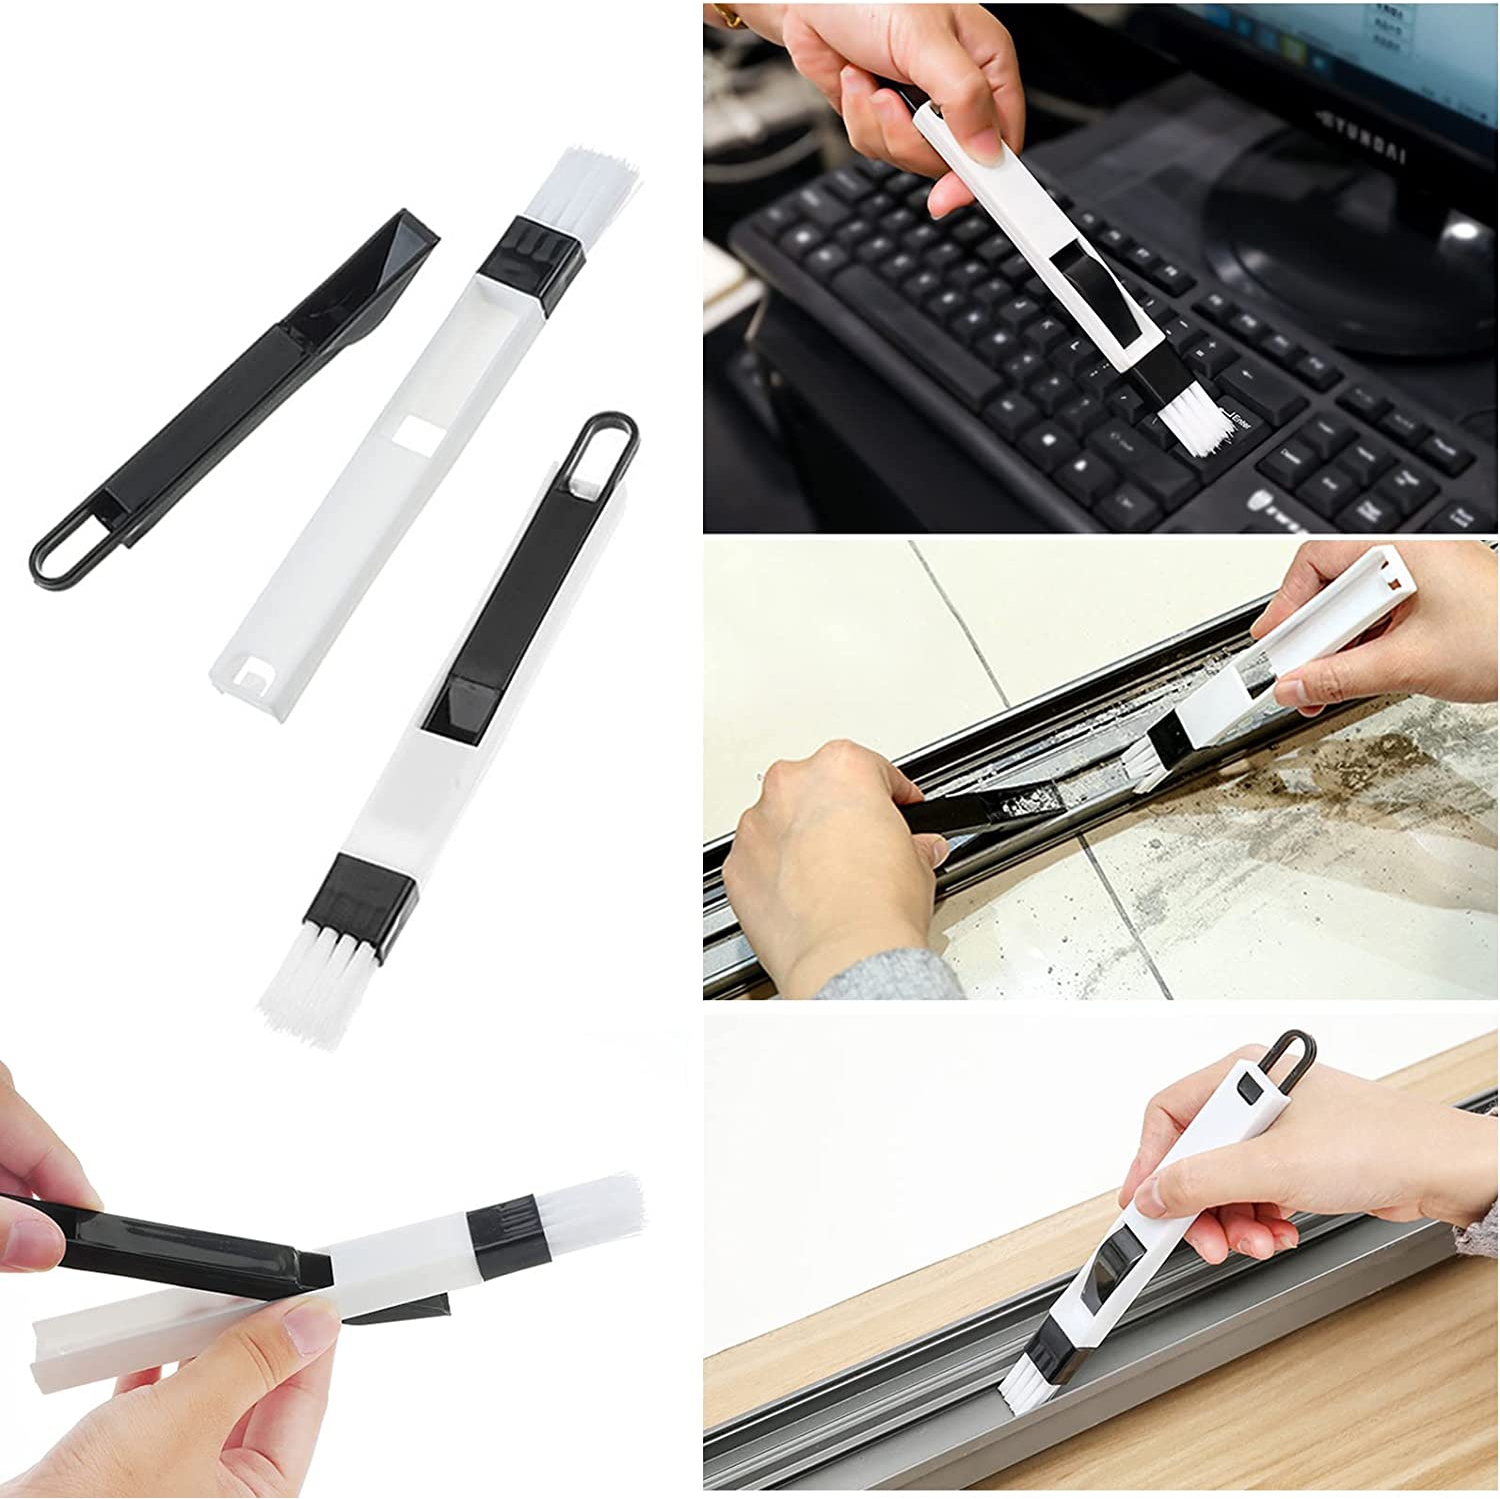 Keyboard Cleaner Cleaning Tools Keycap Puller Key Removal Tool Window Track Groove Cleaner Multipurpose Kitchen Door Hand-held Cleaning Tools Dustpan Brush 